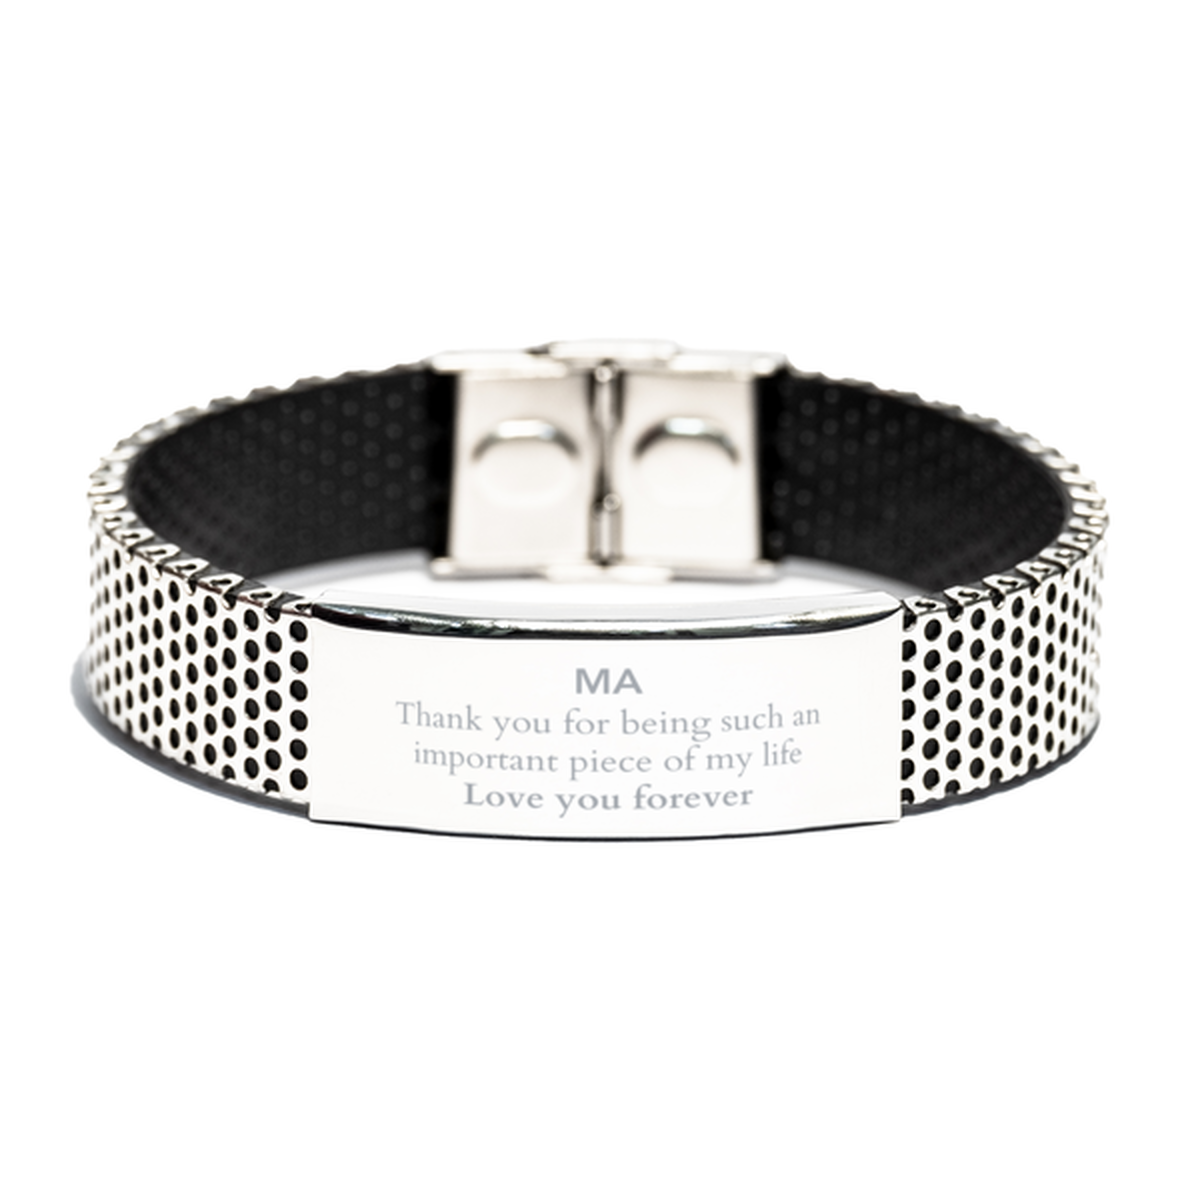 Appropriate Ma Stainless Steel Bracelet Epic Birthday Gifts for Ma Thank you for being such an important piece of my life Ma Christmas Mothers Fathers Day